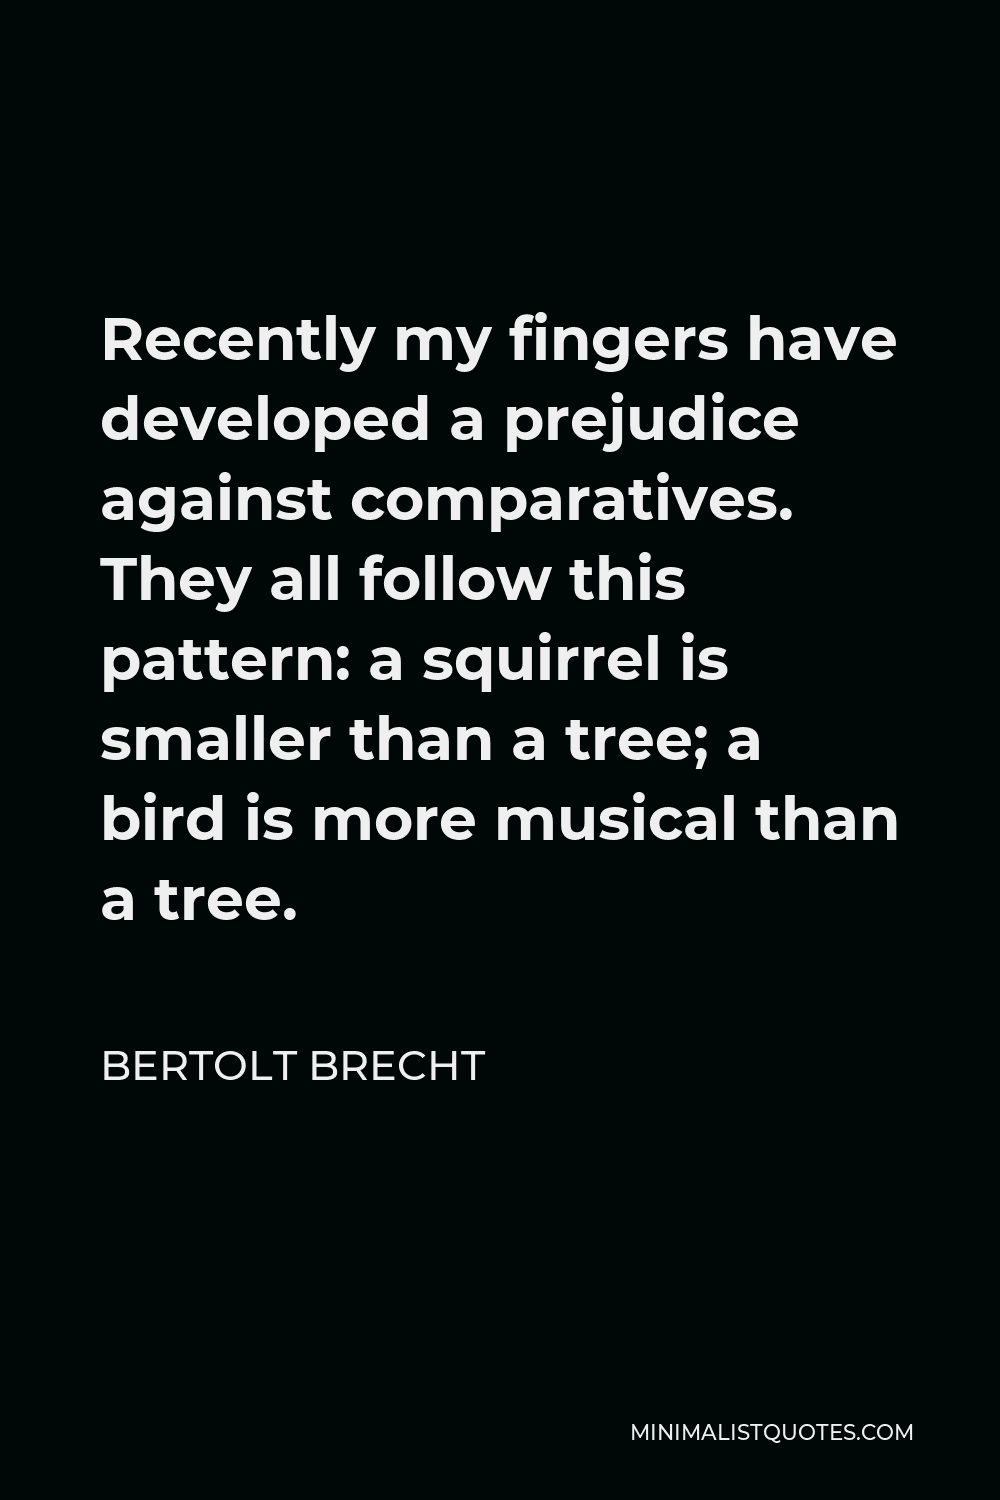 Bertolt Brecht Quote - Recently my fingers have developed a prejudice against comparatives. They all follow this pattern: a squirrel is smaller than a tree; a bird is more musical than a tree.